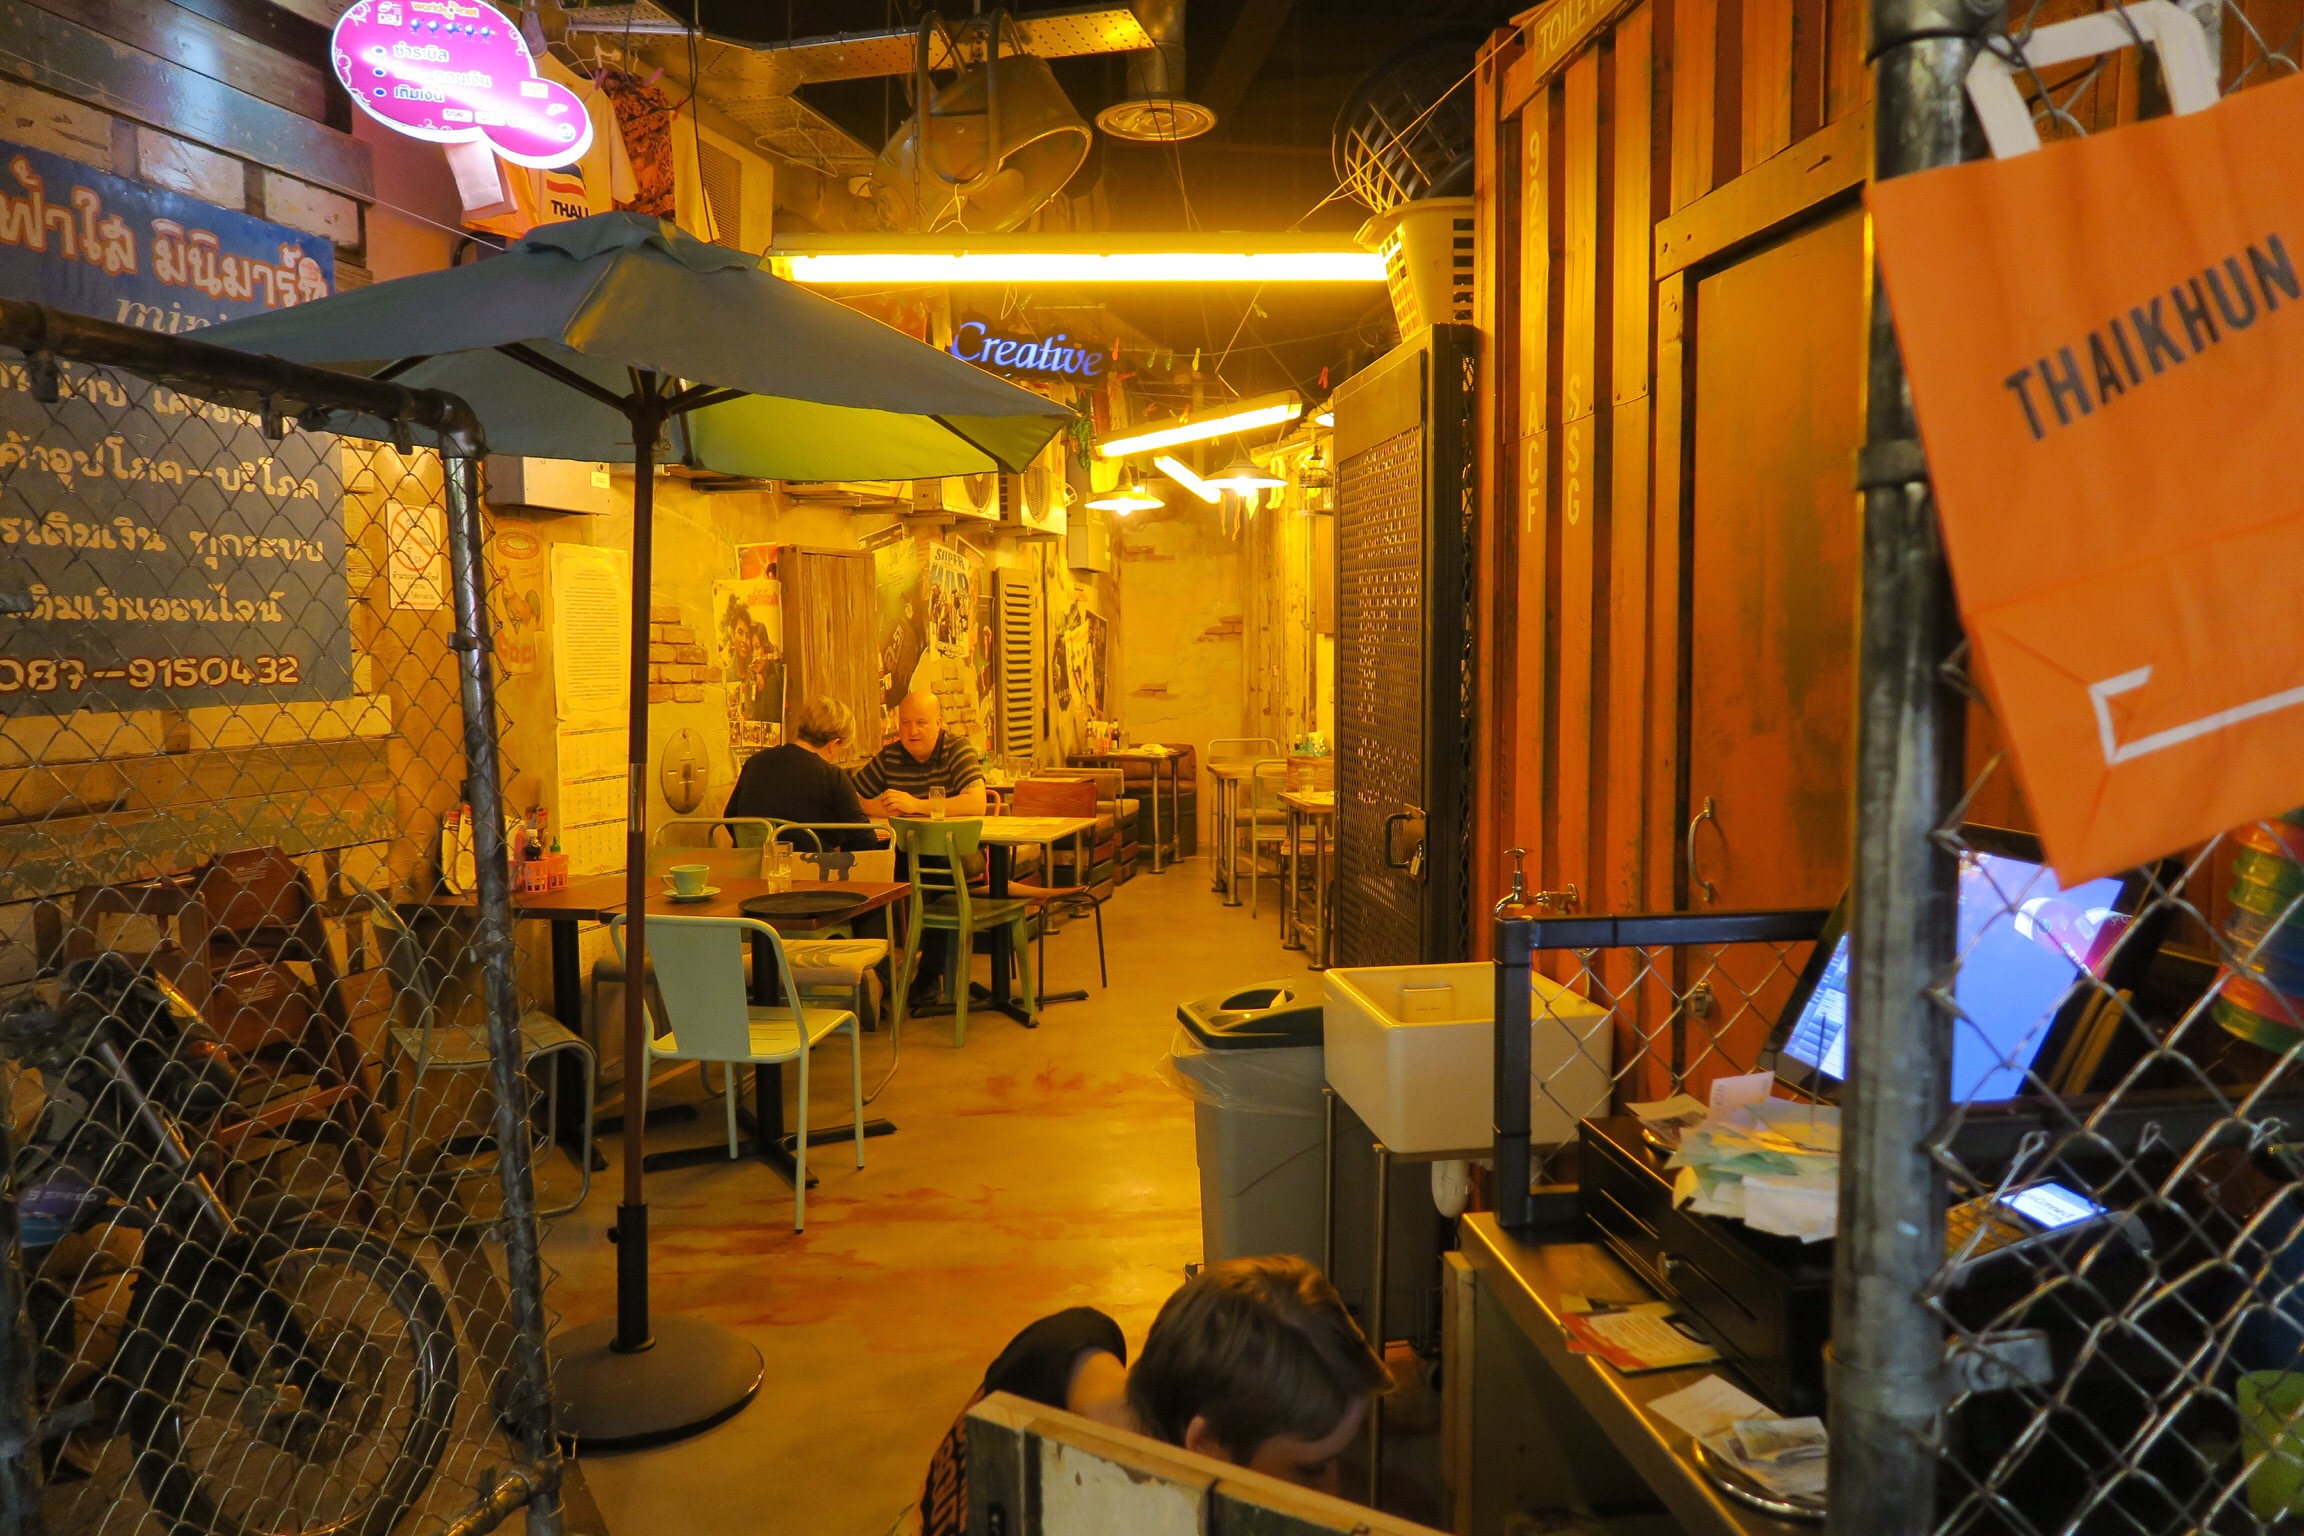 Review: Thaikhun kids meals, Metro Centre